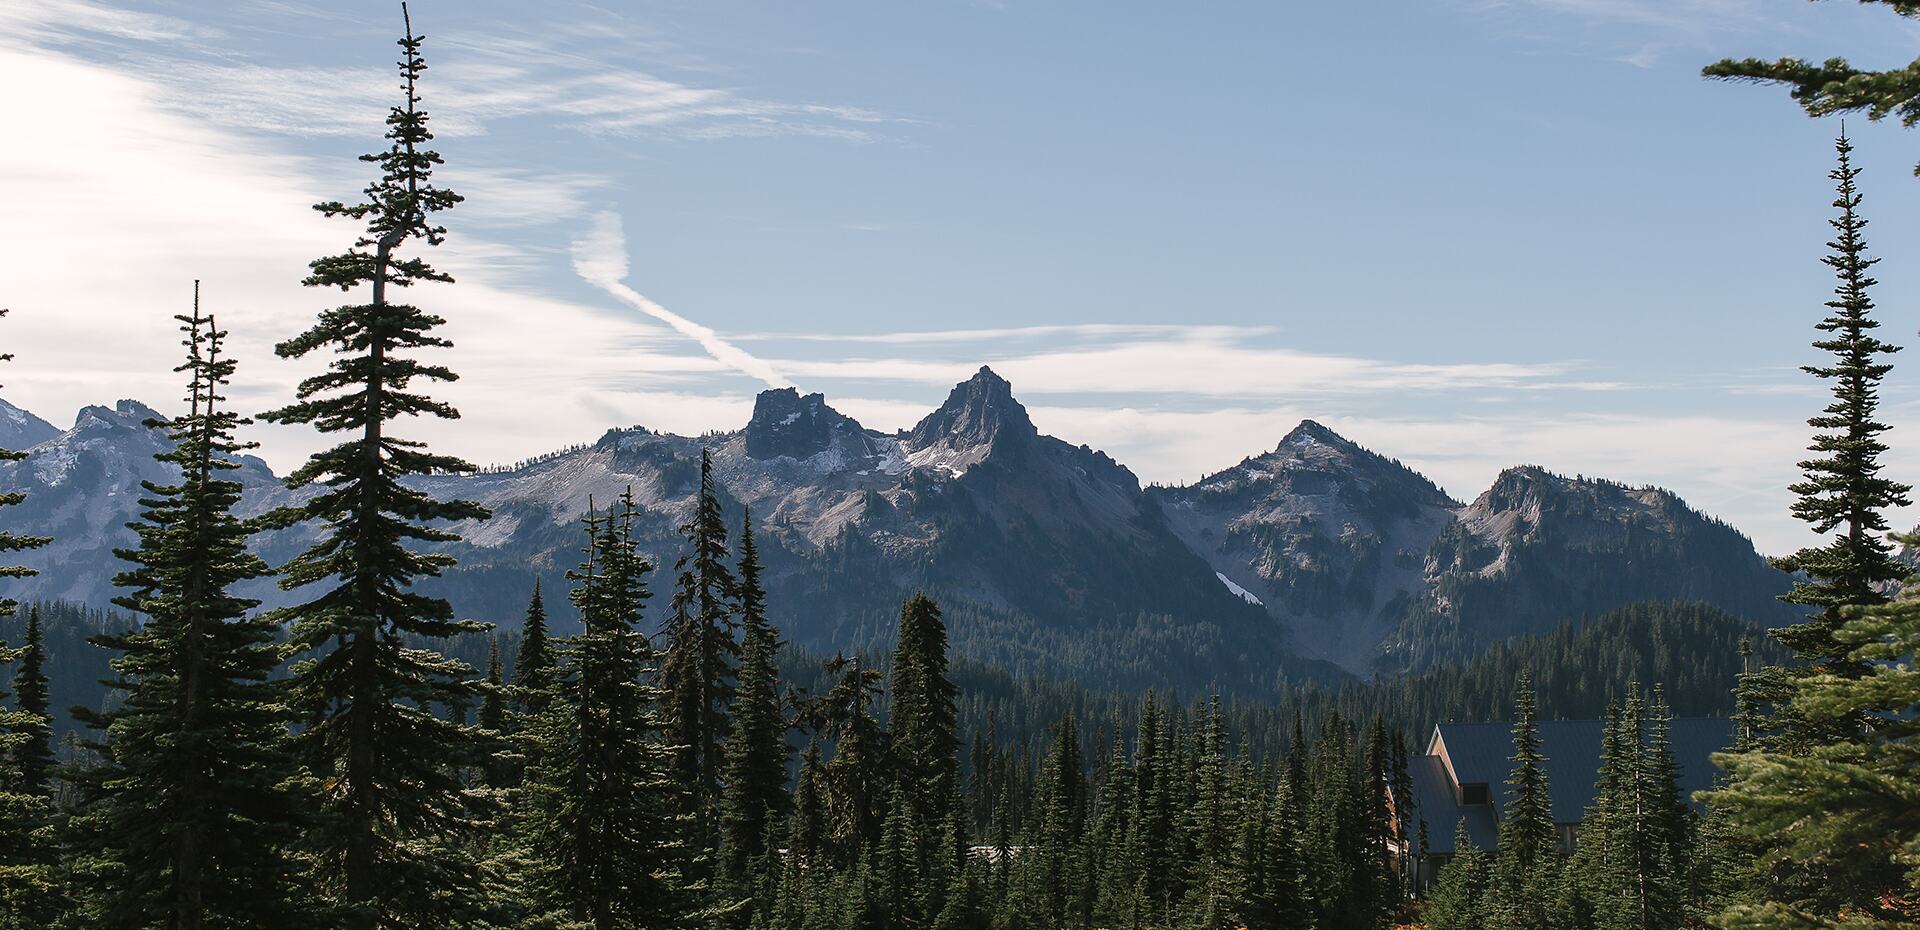 an image of the pacific northwest mountainside